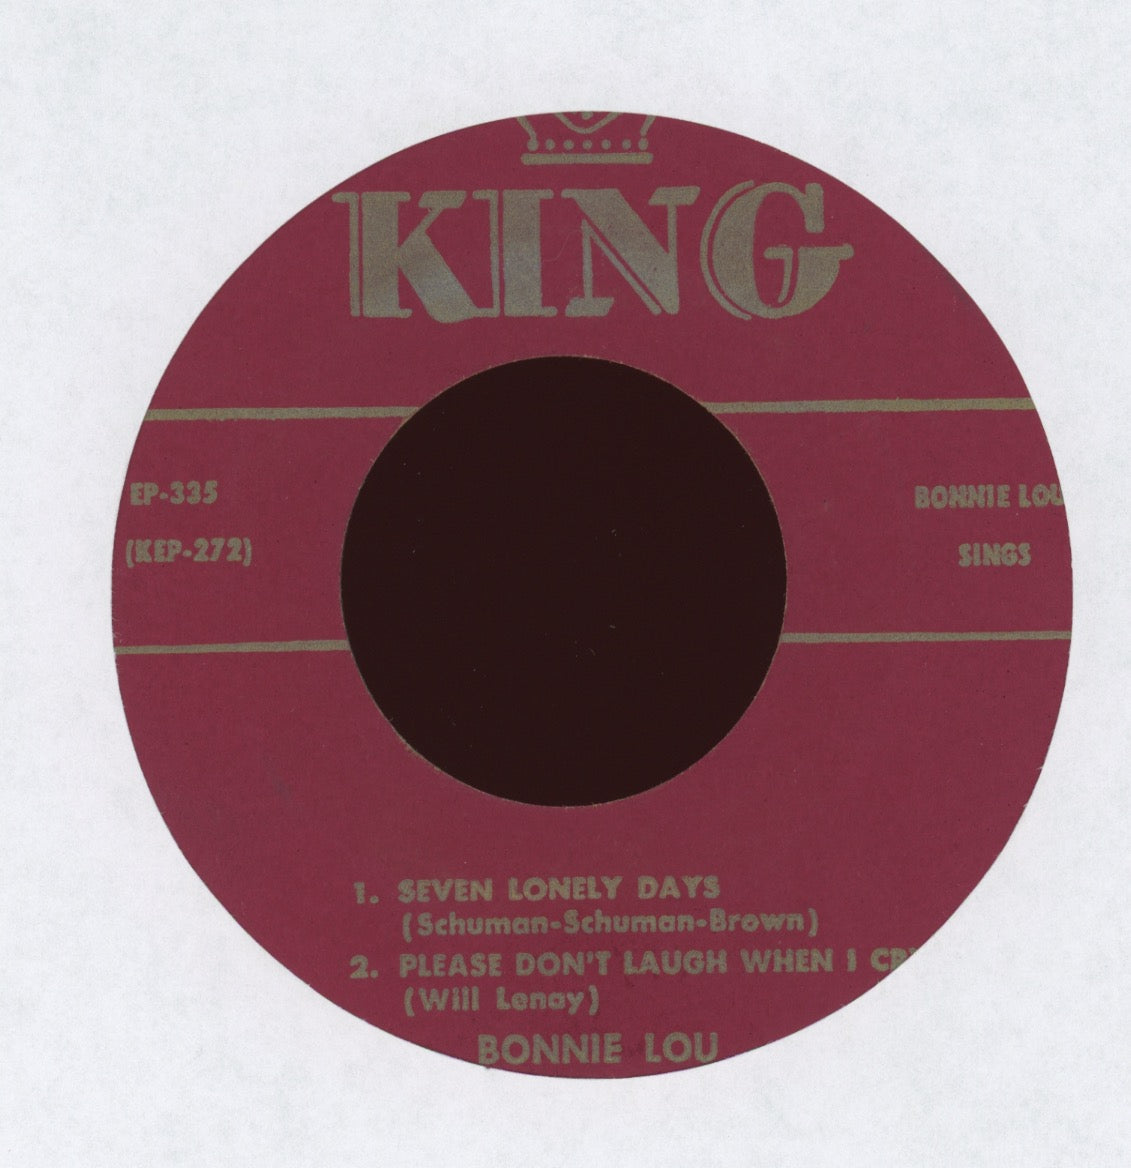 Bonnie Lou - Bonnie Lou Sings on King 45 EP 335 With Cover